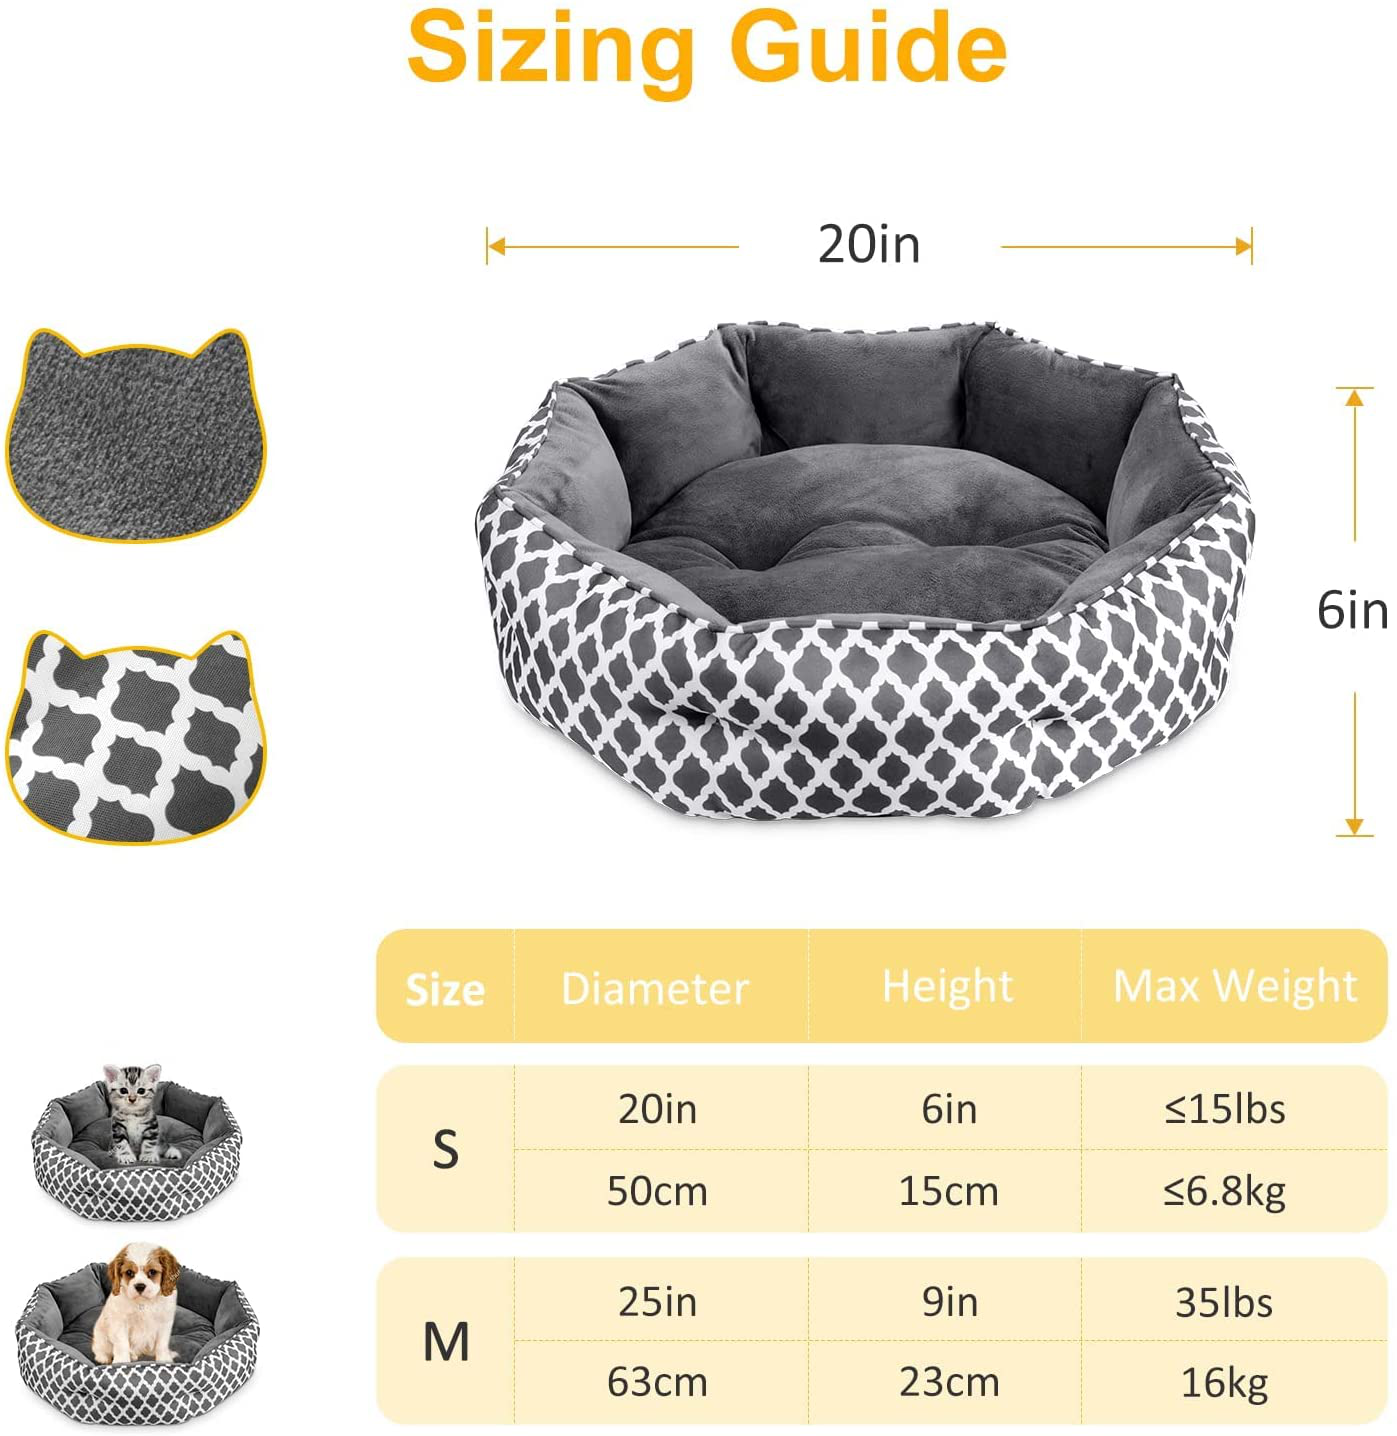 JOYO Cat Bed for Indoor Cat, 20 Inch Cat Bed Machine Washable with Waterproof Non-Slip Bottom, Double-Sided Kitten Plush Cushion Bed for Small Dogs, Soft Flannel round Warming Sofa Bed for Kitty Puppy